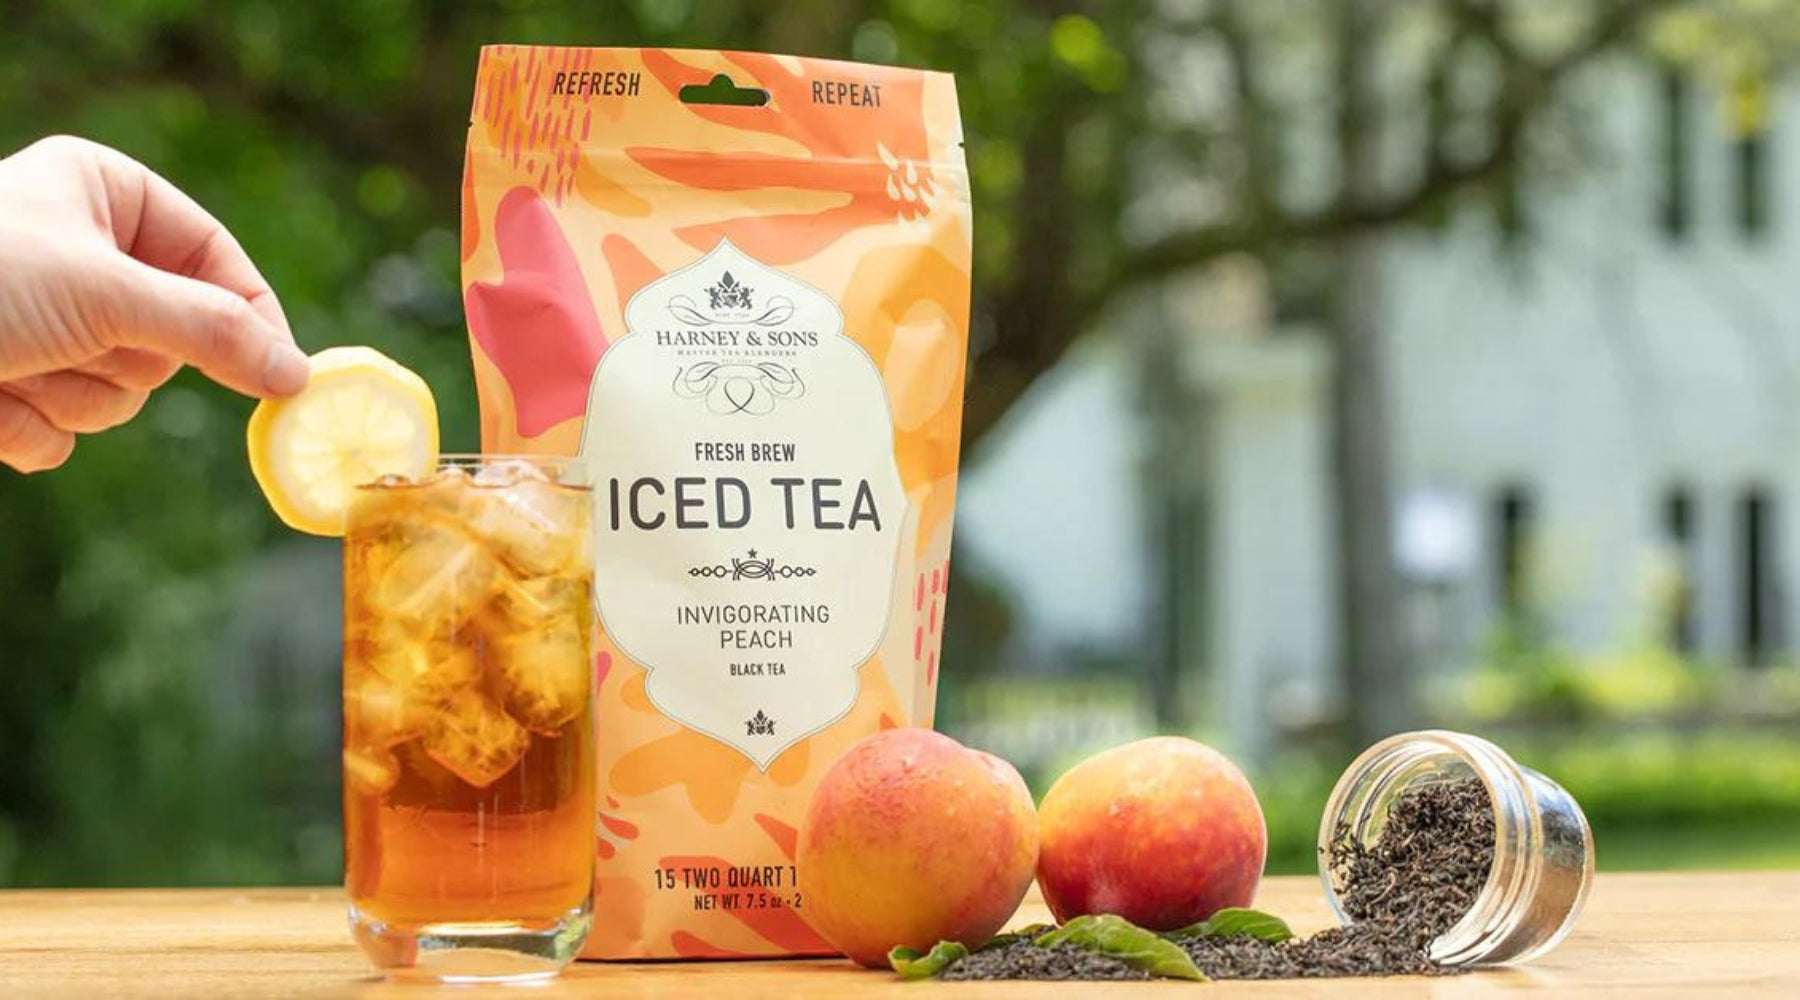 Celebrate summer with iced teas!